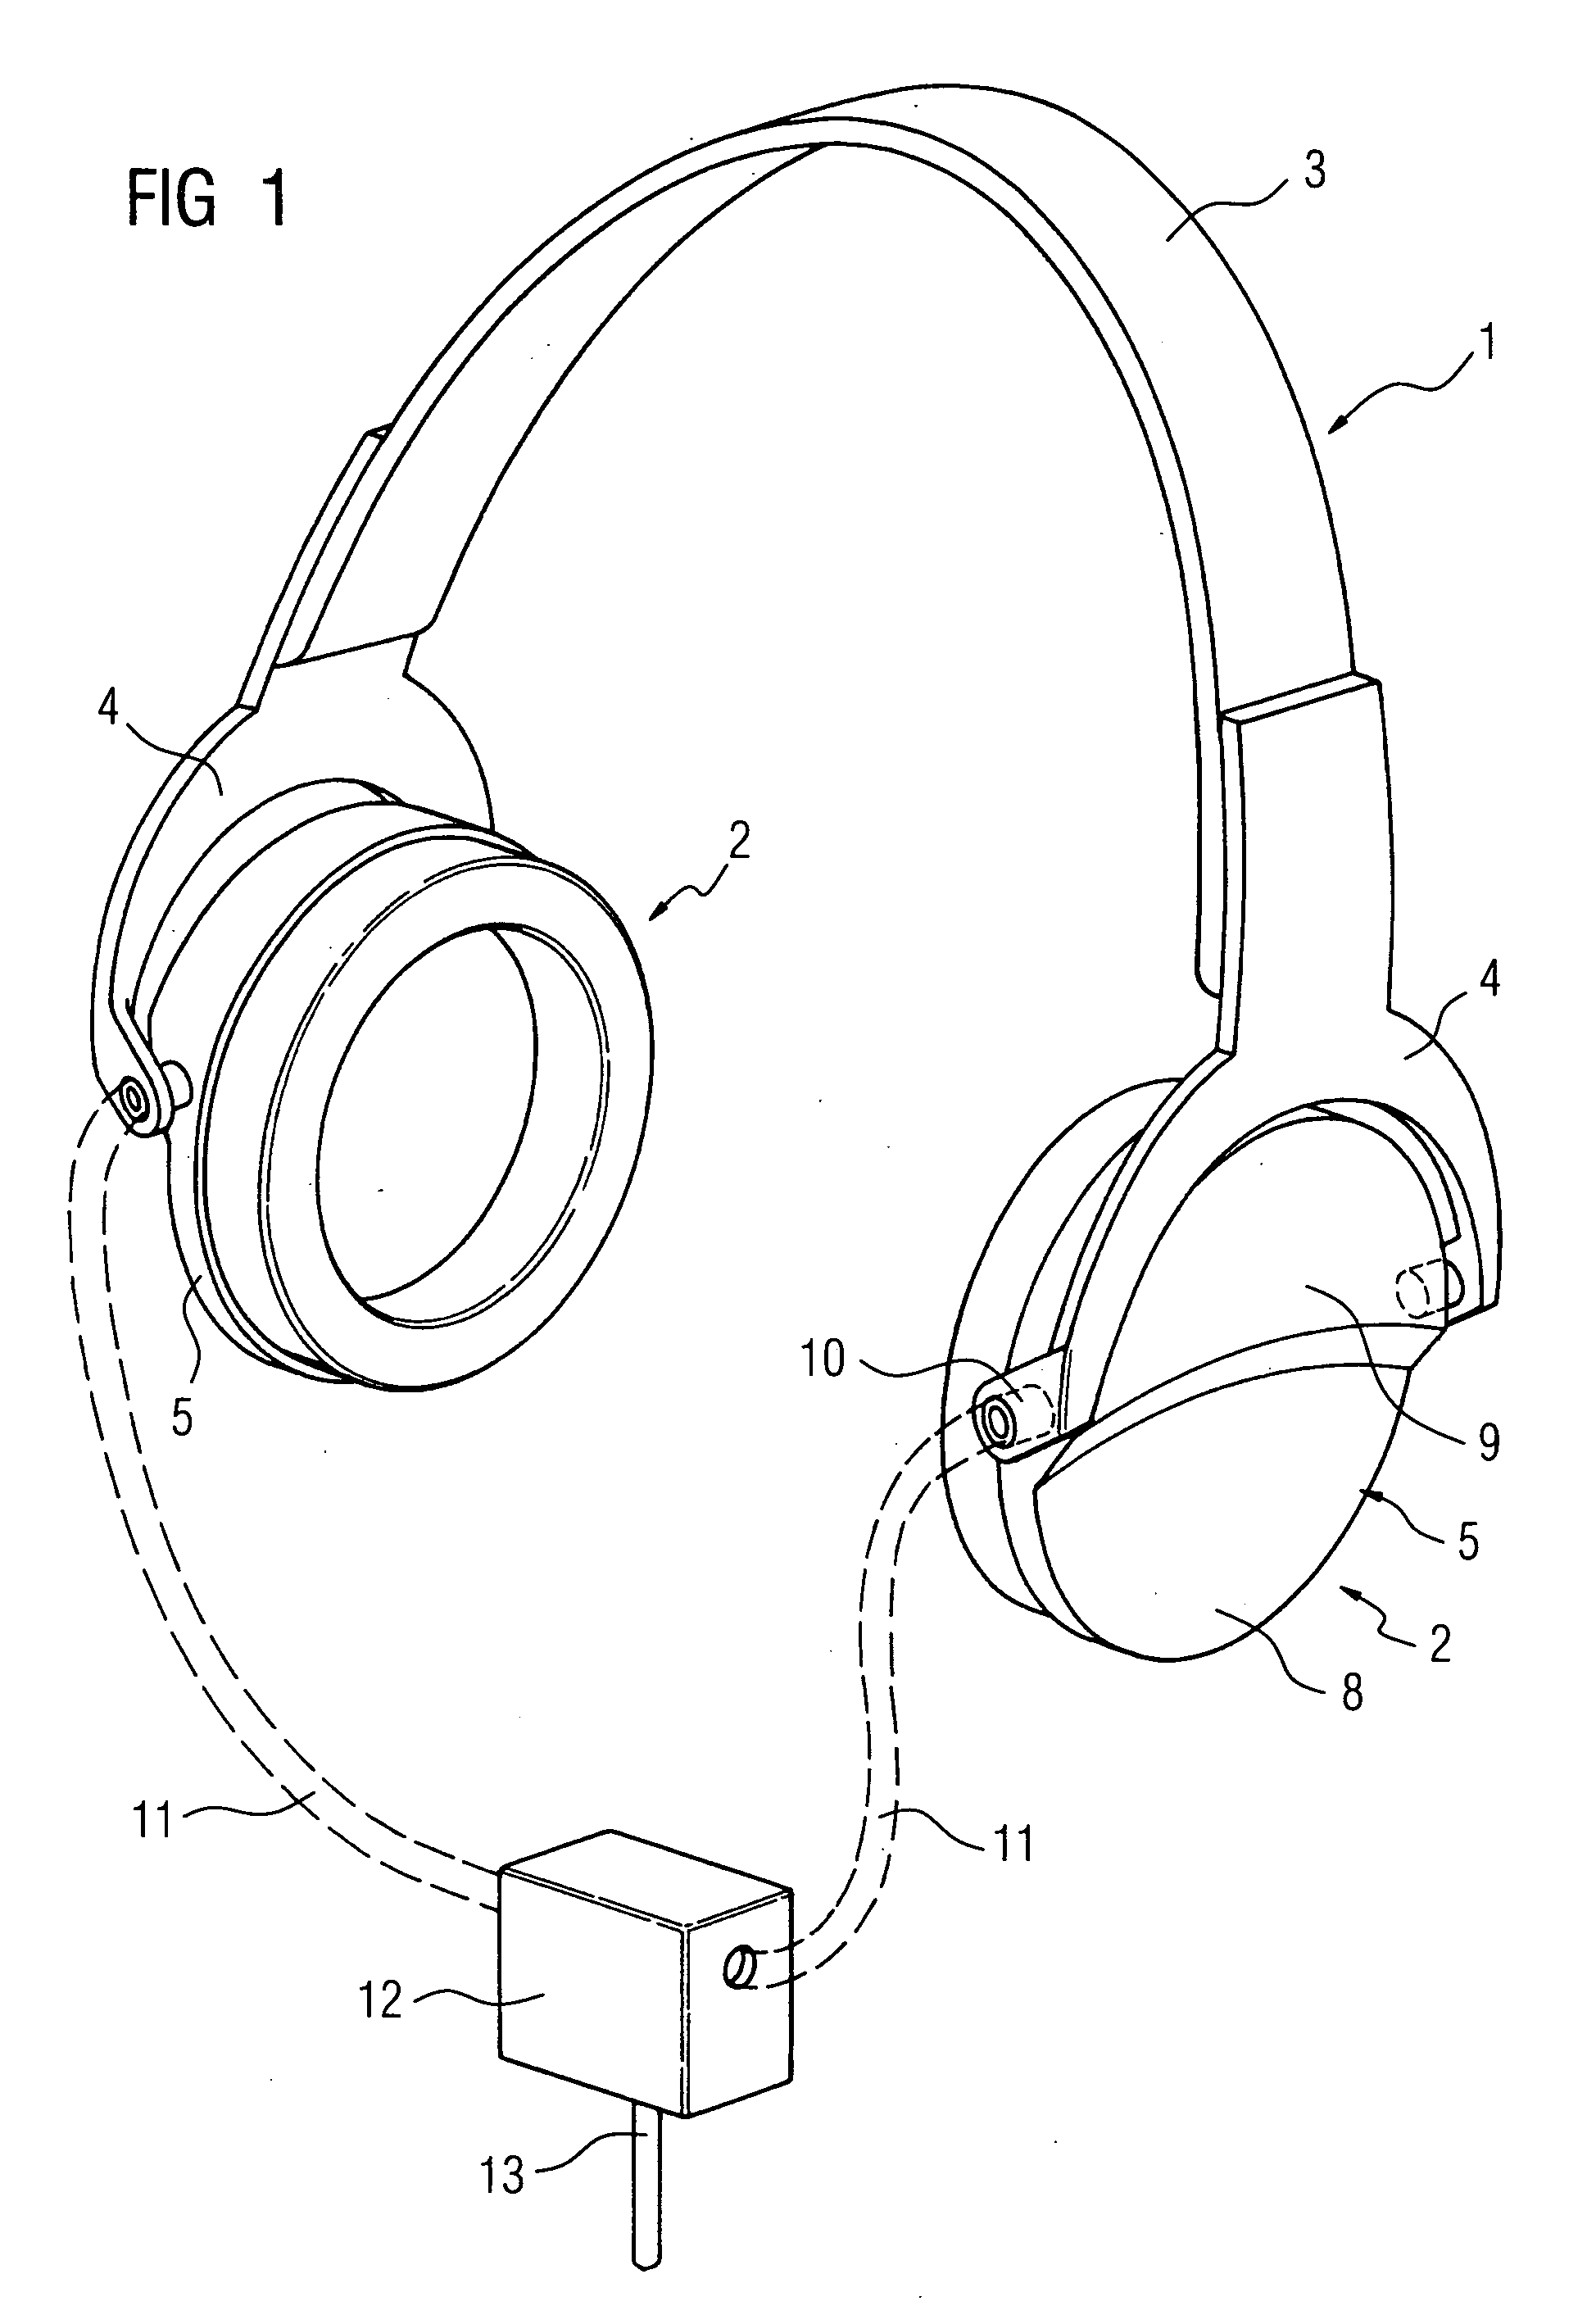 Hearing protection for use in magnetic resonance facilities